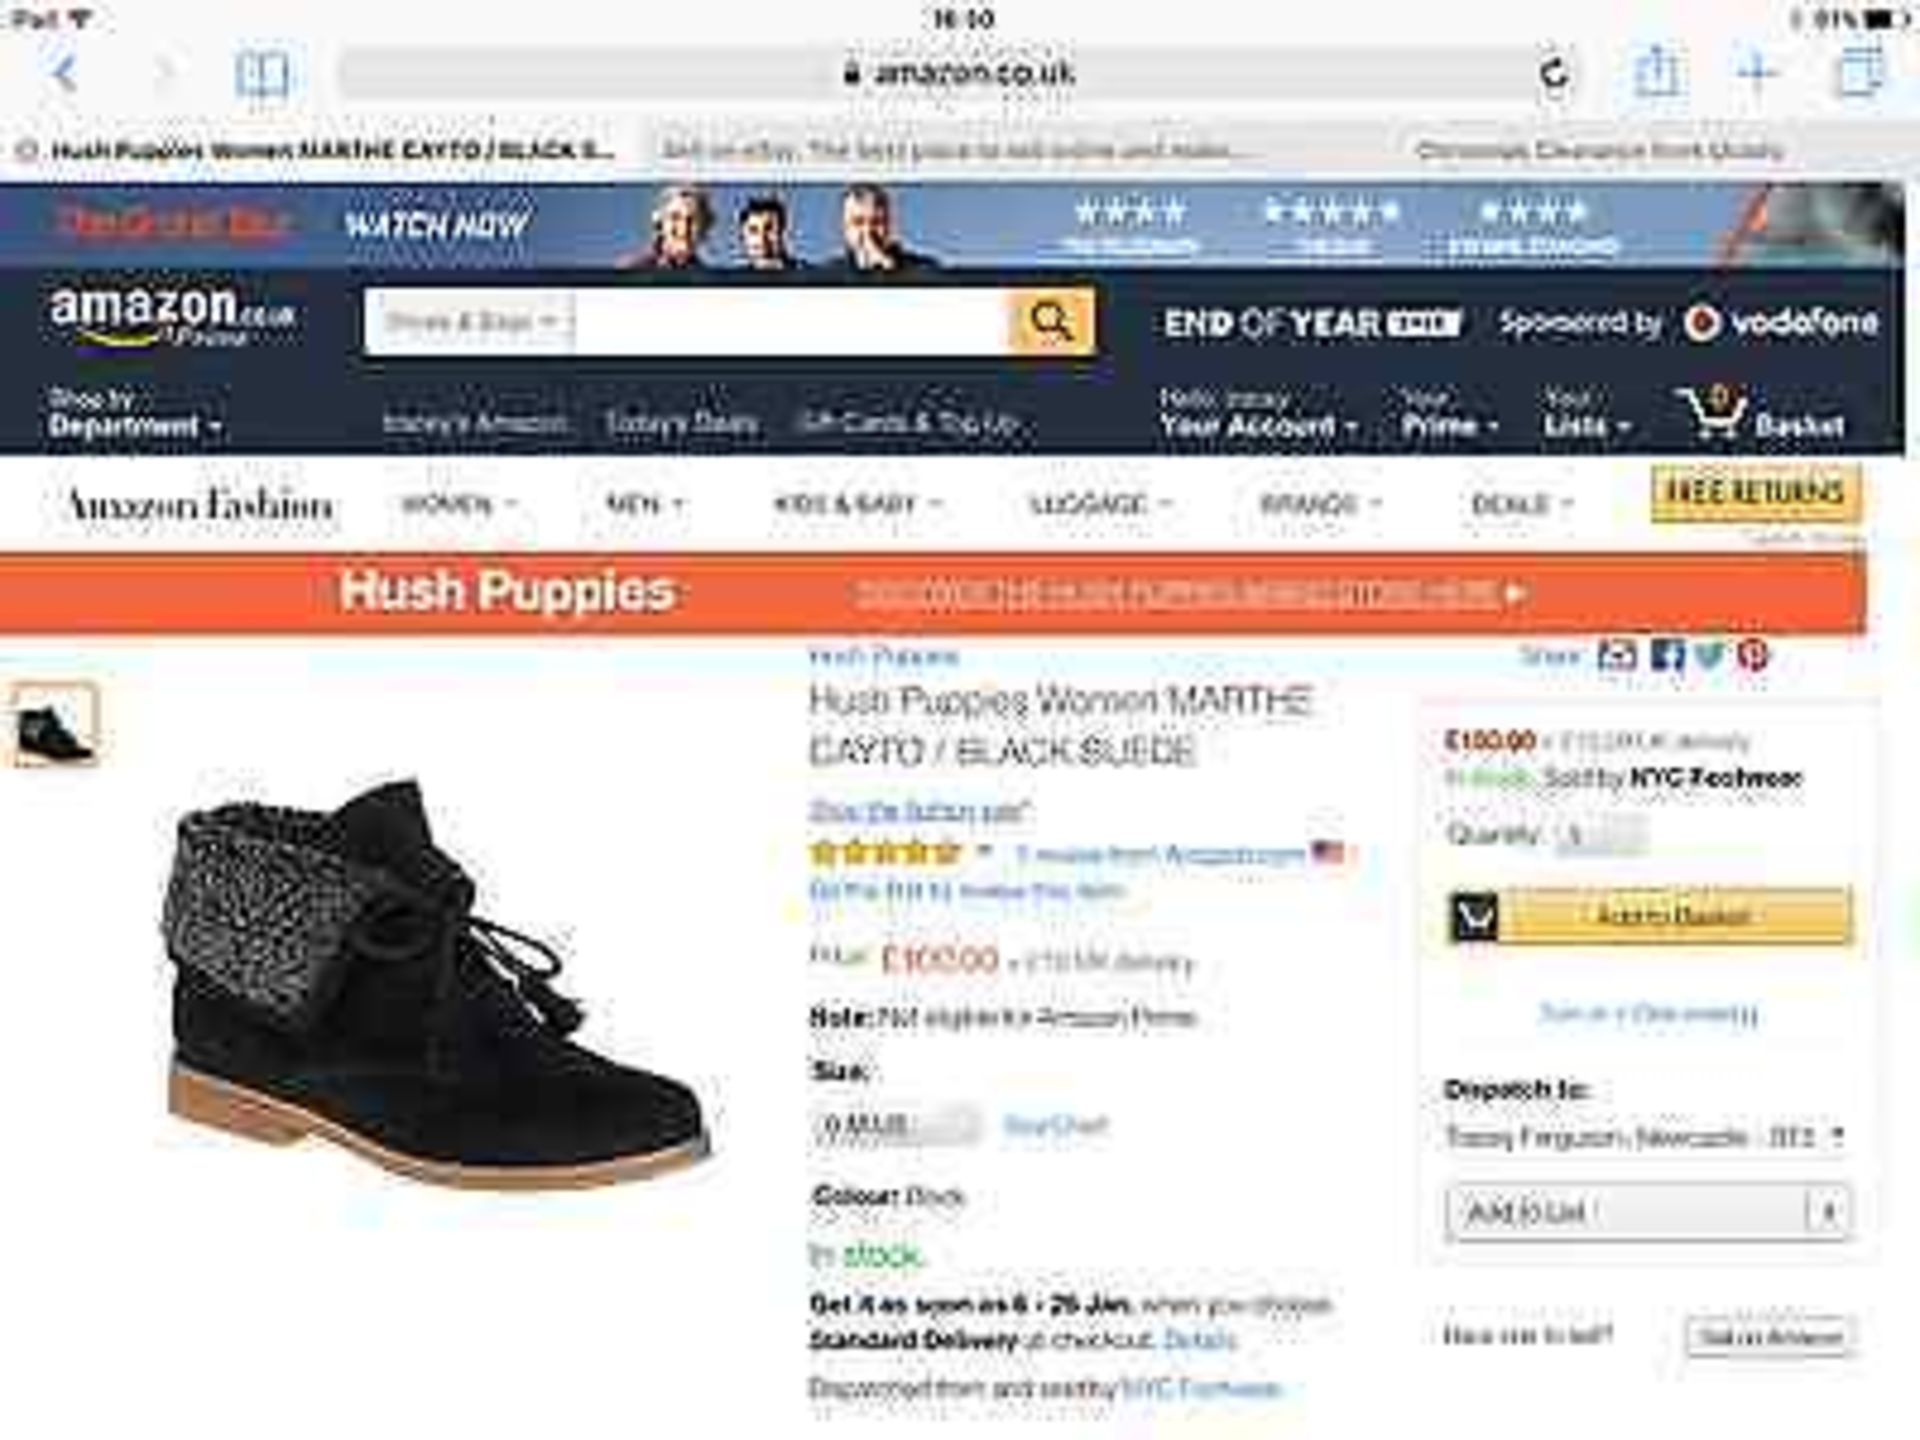 Hush Puppies Black Suede Martha Cayto Ankle Boot, Size UK 7, RRP £100 (New with box) [Ref: ] - Image 12 of 12